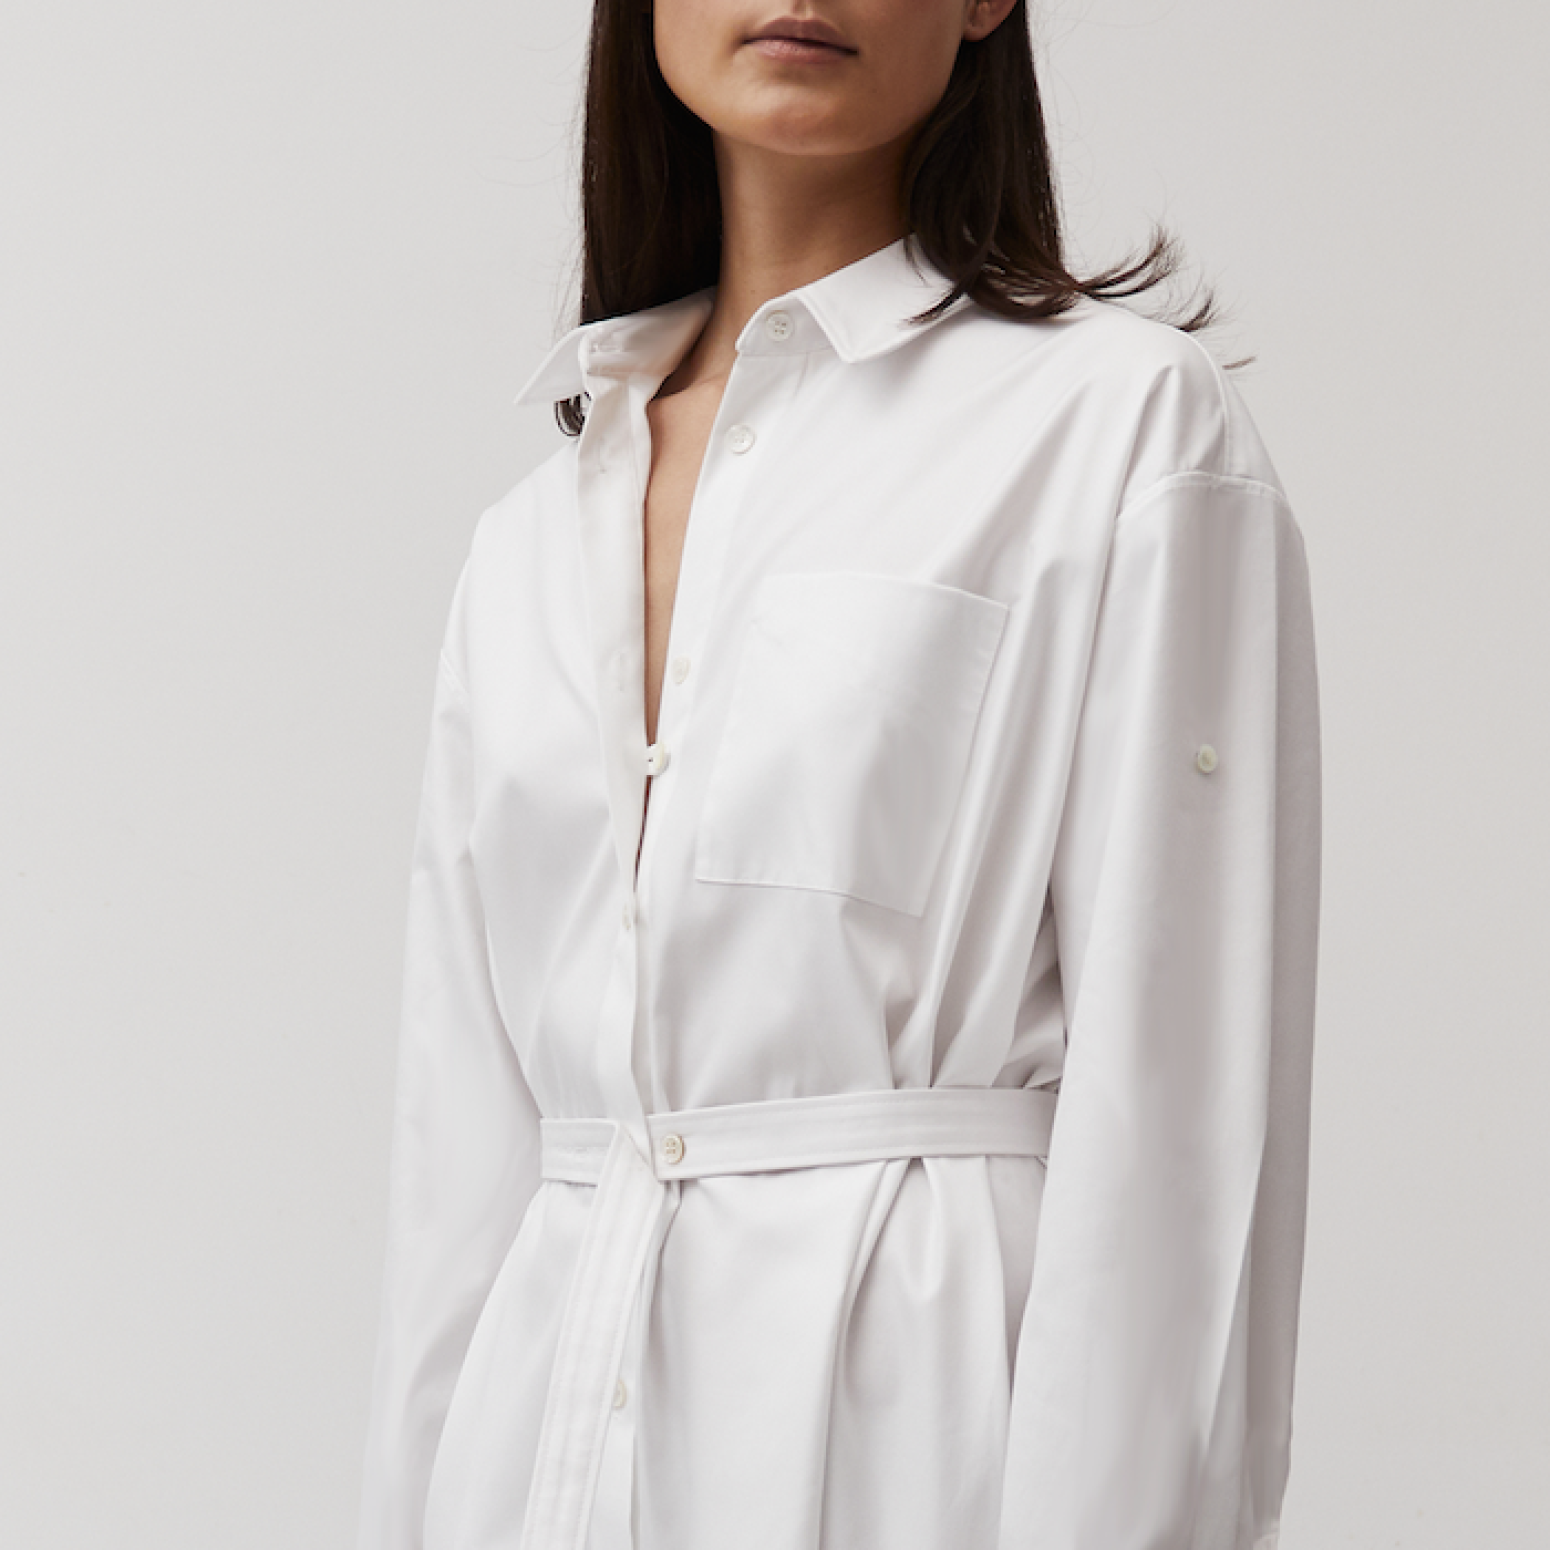 Made in London, organic cotton white Shirt Dress - The Array